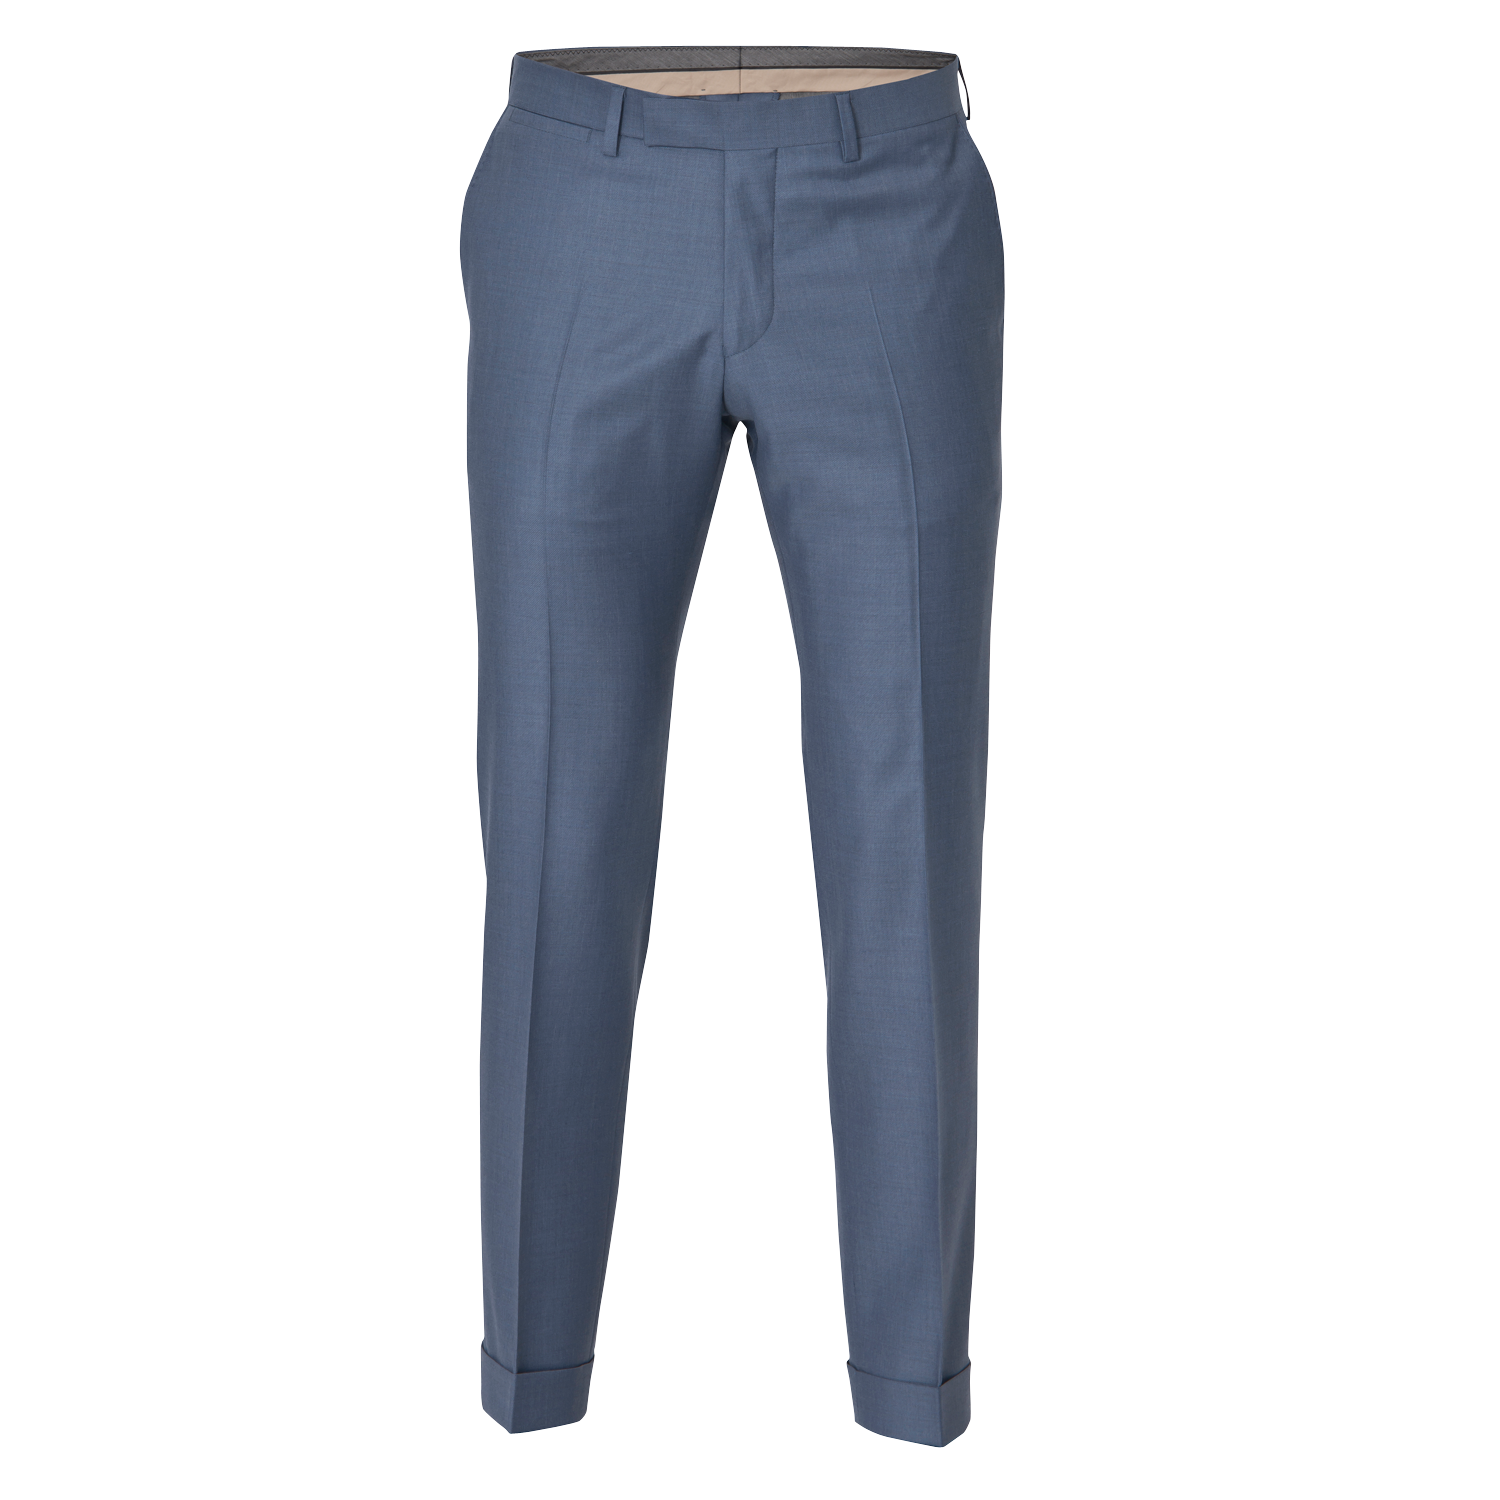 Trouser Free Png Image - Pant, Transparent background PNG HD thumbnail